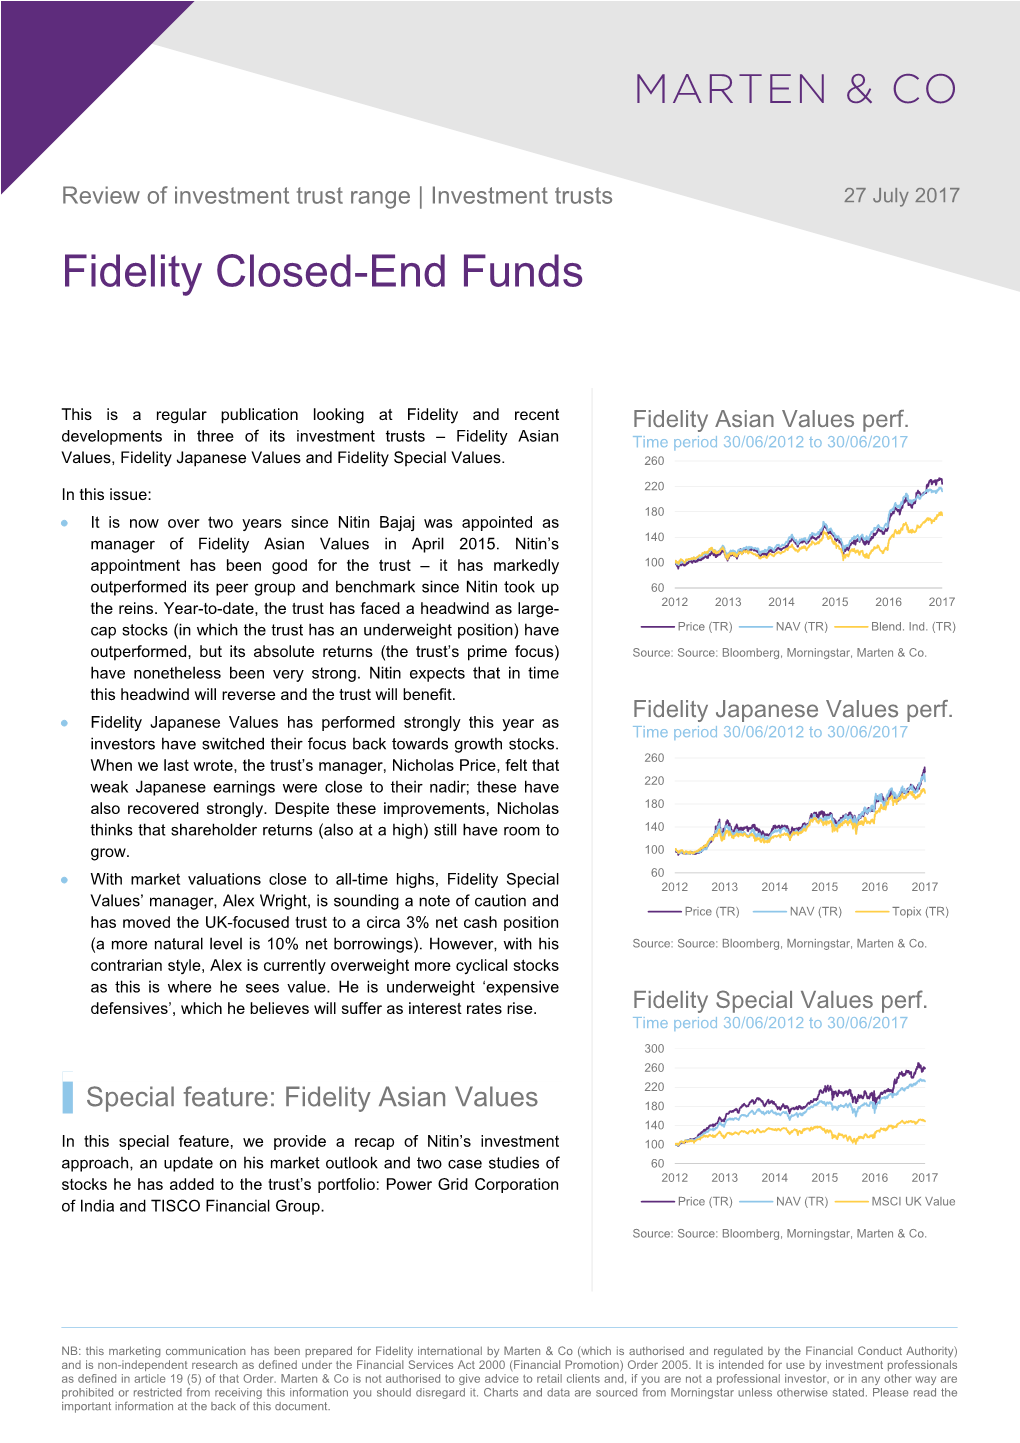 Fidelity Closed-End Funds